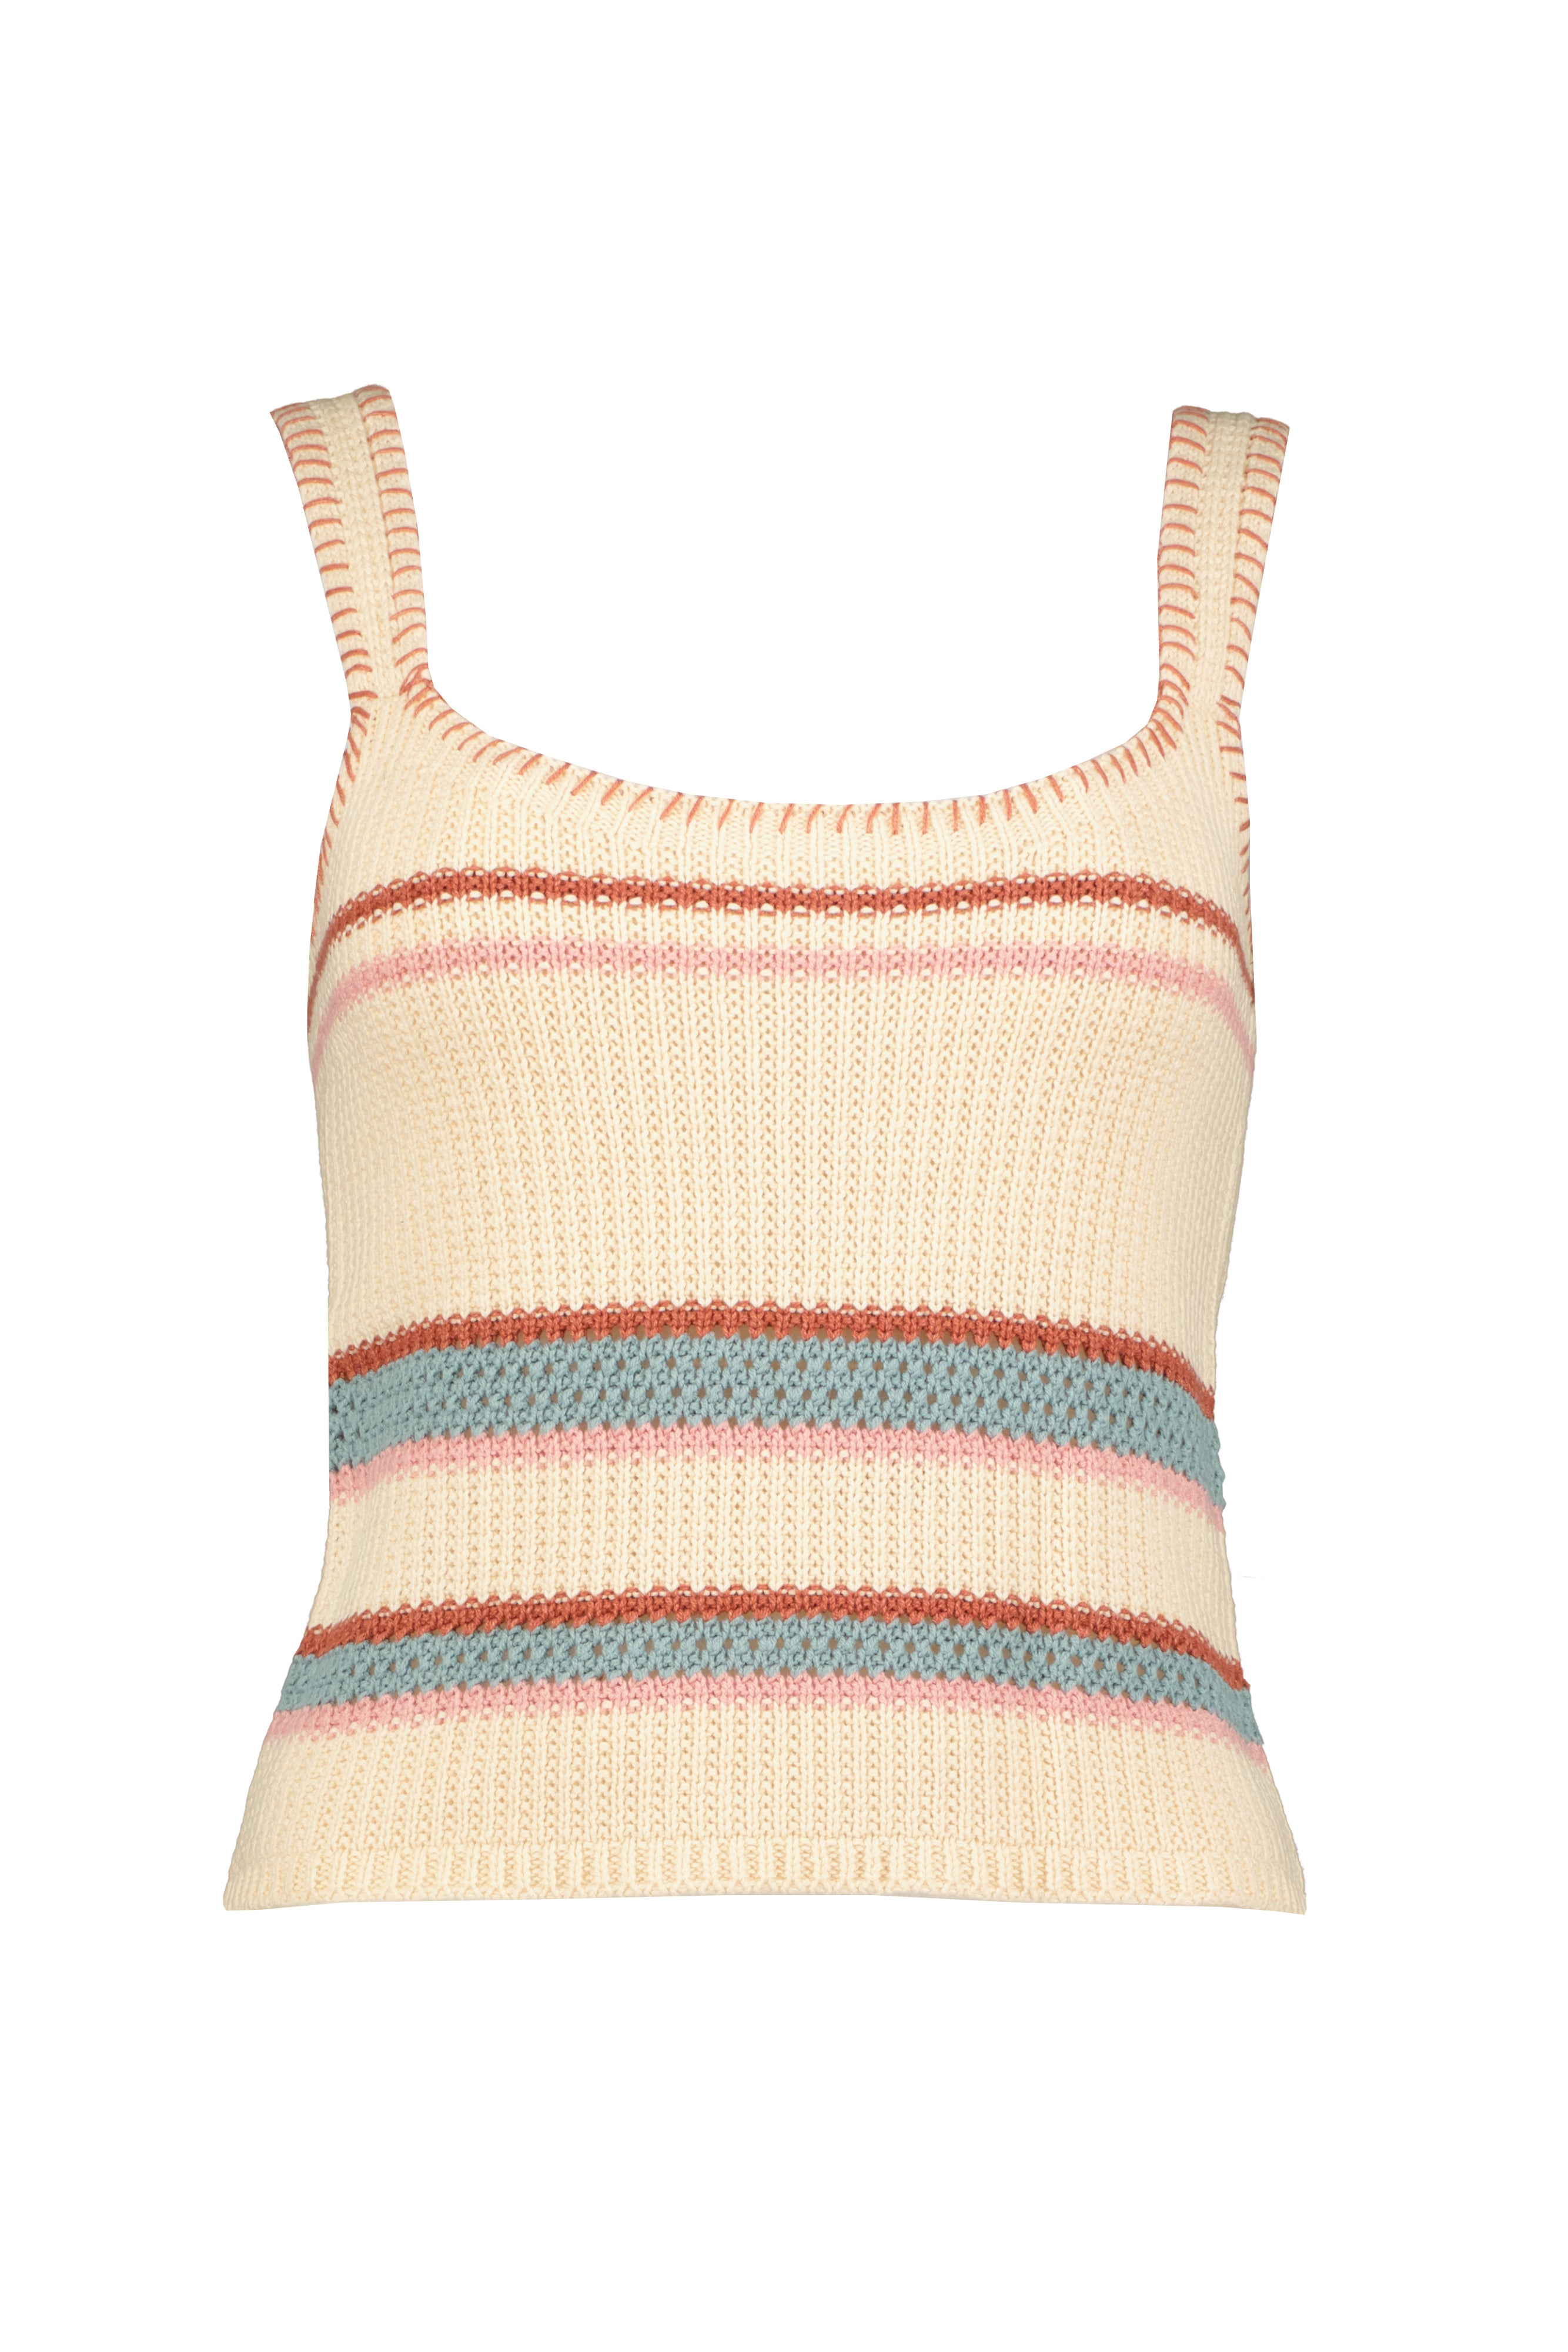 Bishop & Young desert bloom sweater  tank with stripes and stitching detail at Tru Blue Boutique